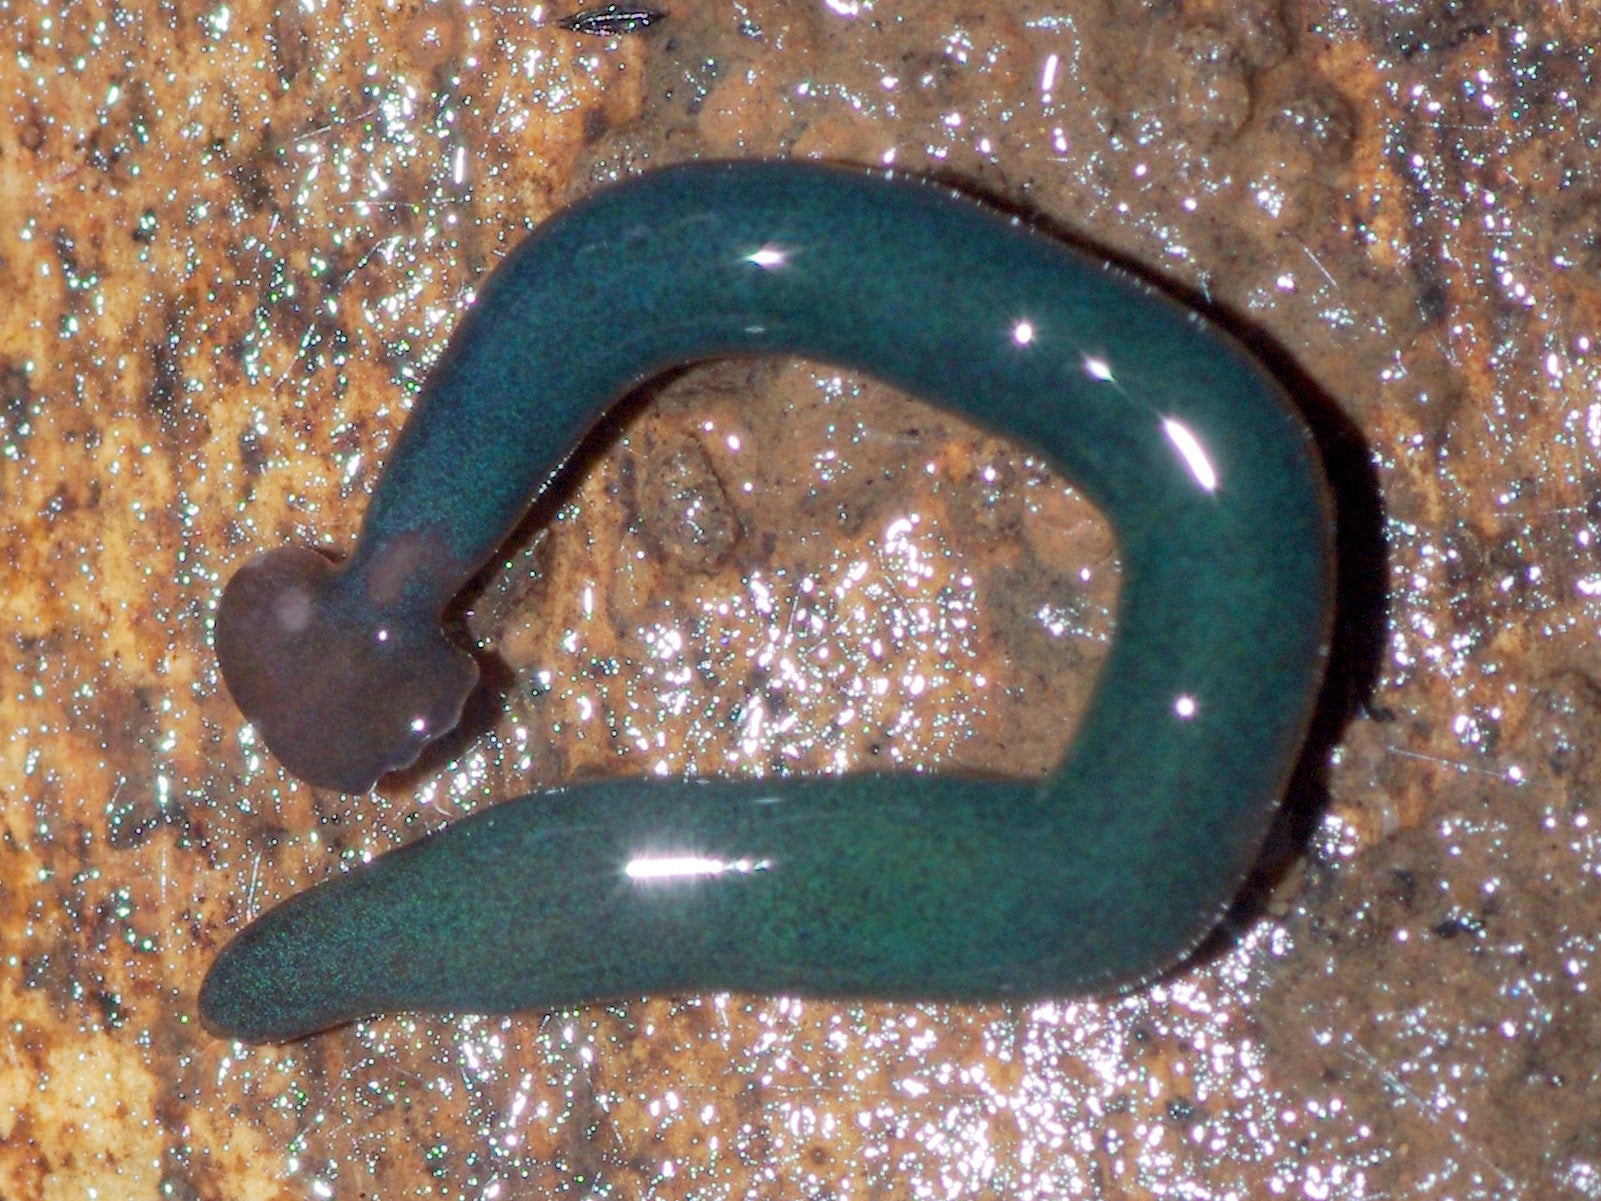 Hammerhead worm species Diversibipalium 'blue' from Mayotte, a French island off the African East Coast